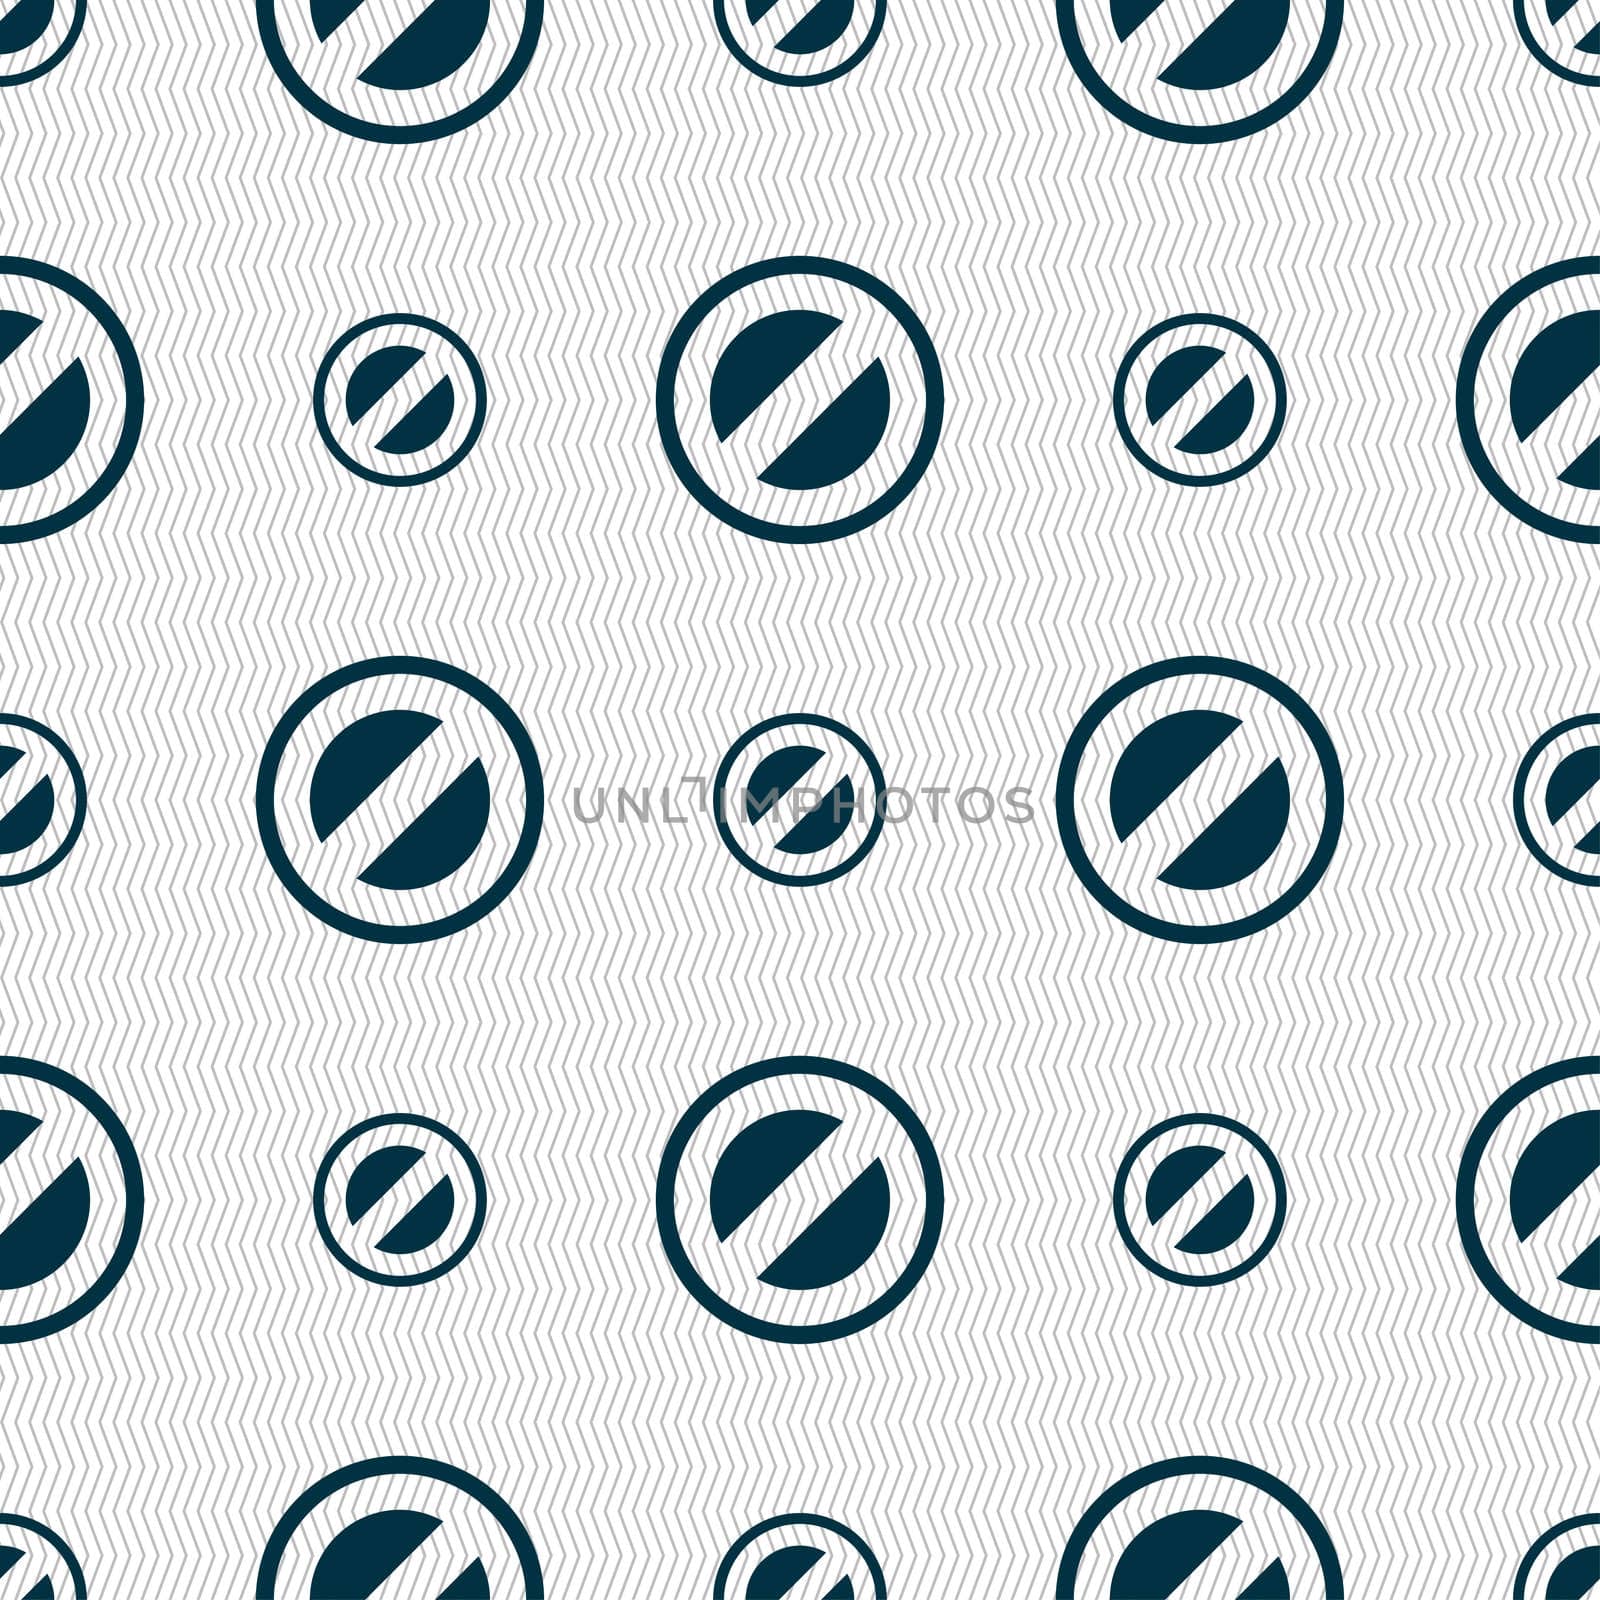 Cancel icon sign. Seamless pattern with geometric texture. illustration